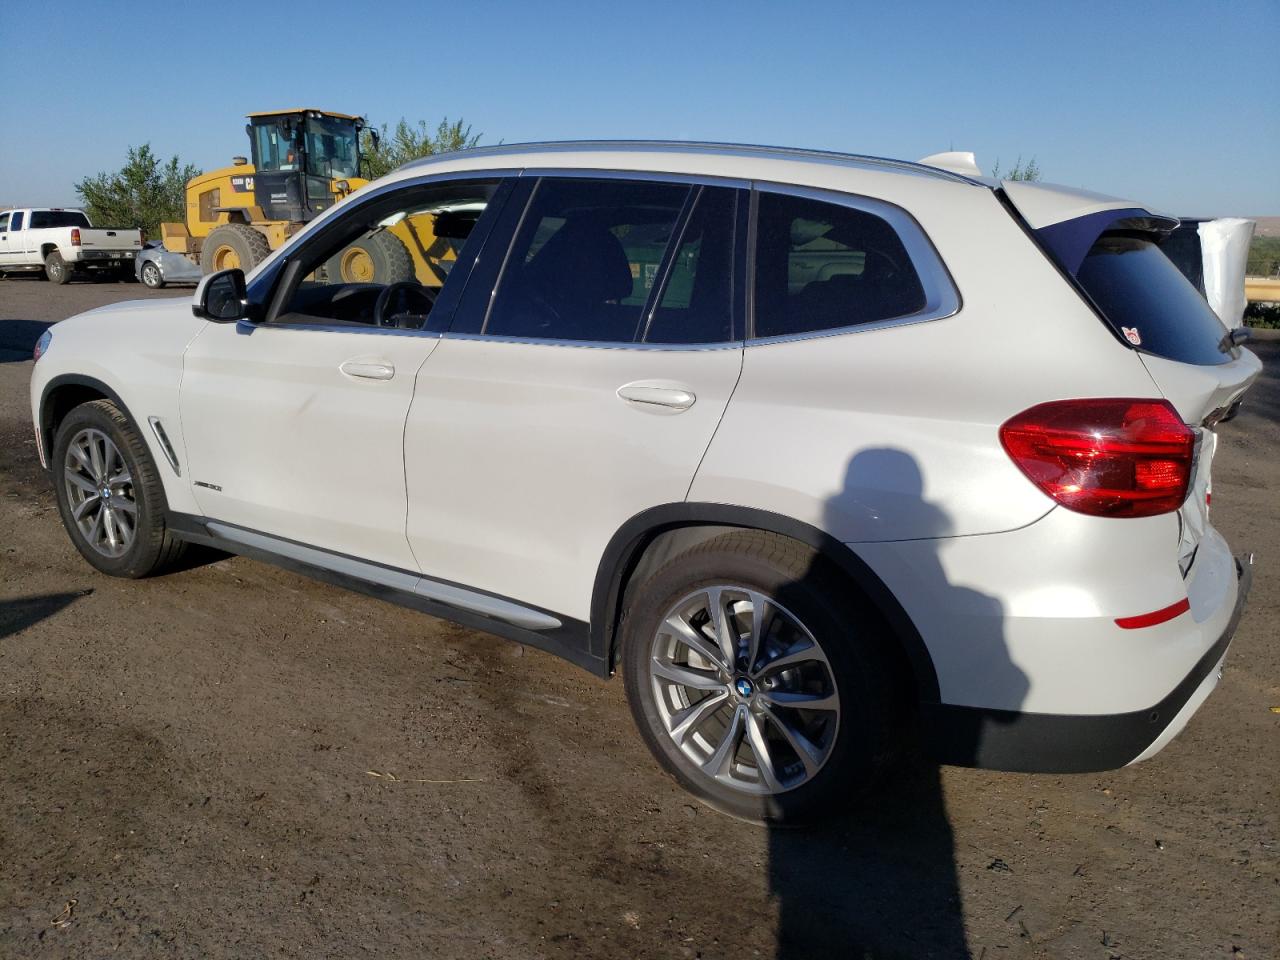 Buy 2018 BMW X3 Xdrive3 2.0L 5UXTR9C5XJL****** from USA Auctions 